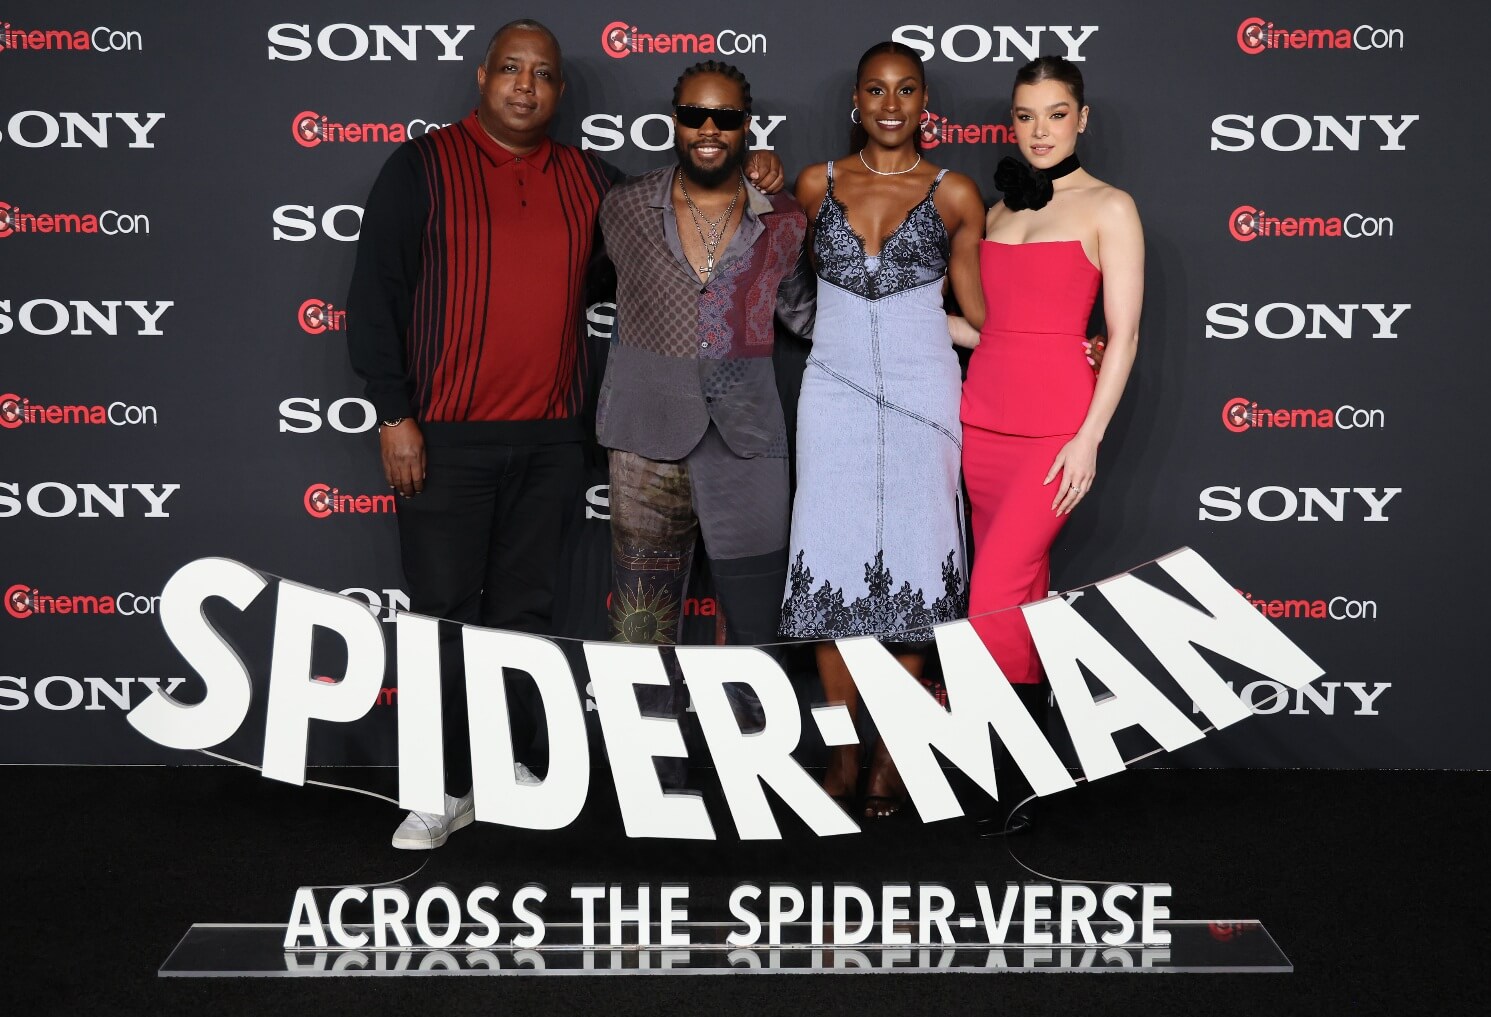 Kemp Powers, Shameik Moore, Issa Rae and Hailee Steinfeld posing for a photo a CinemaCon 2023 event